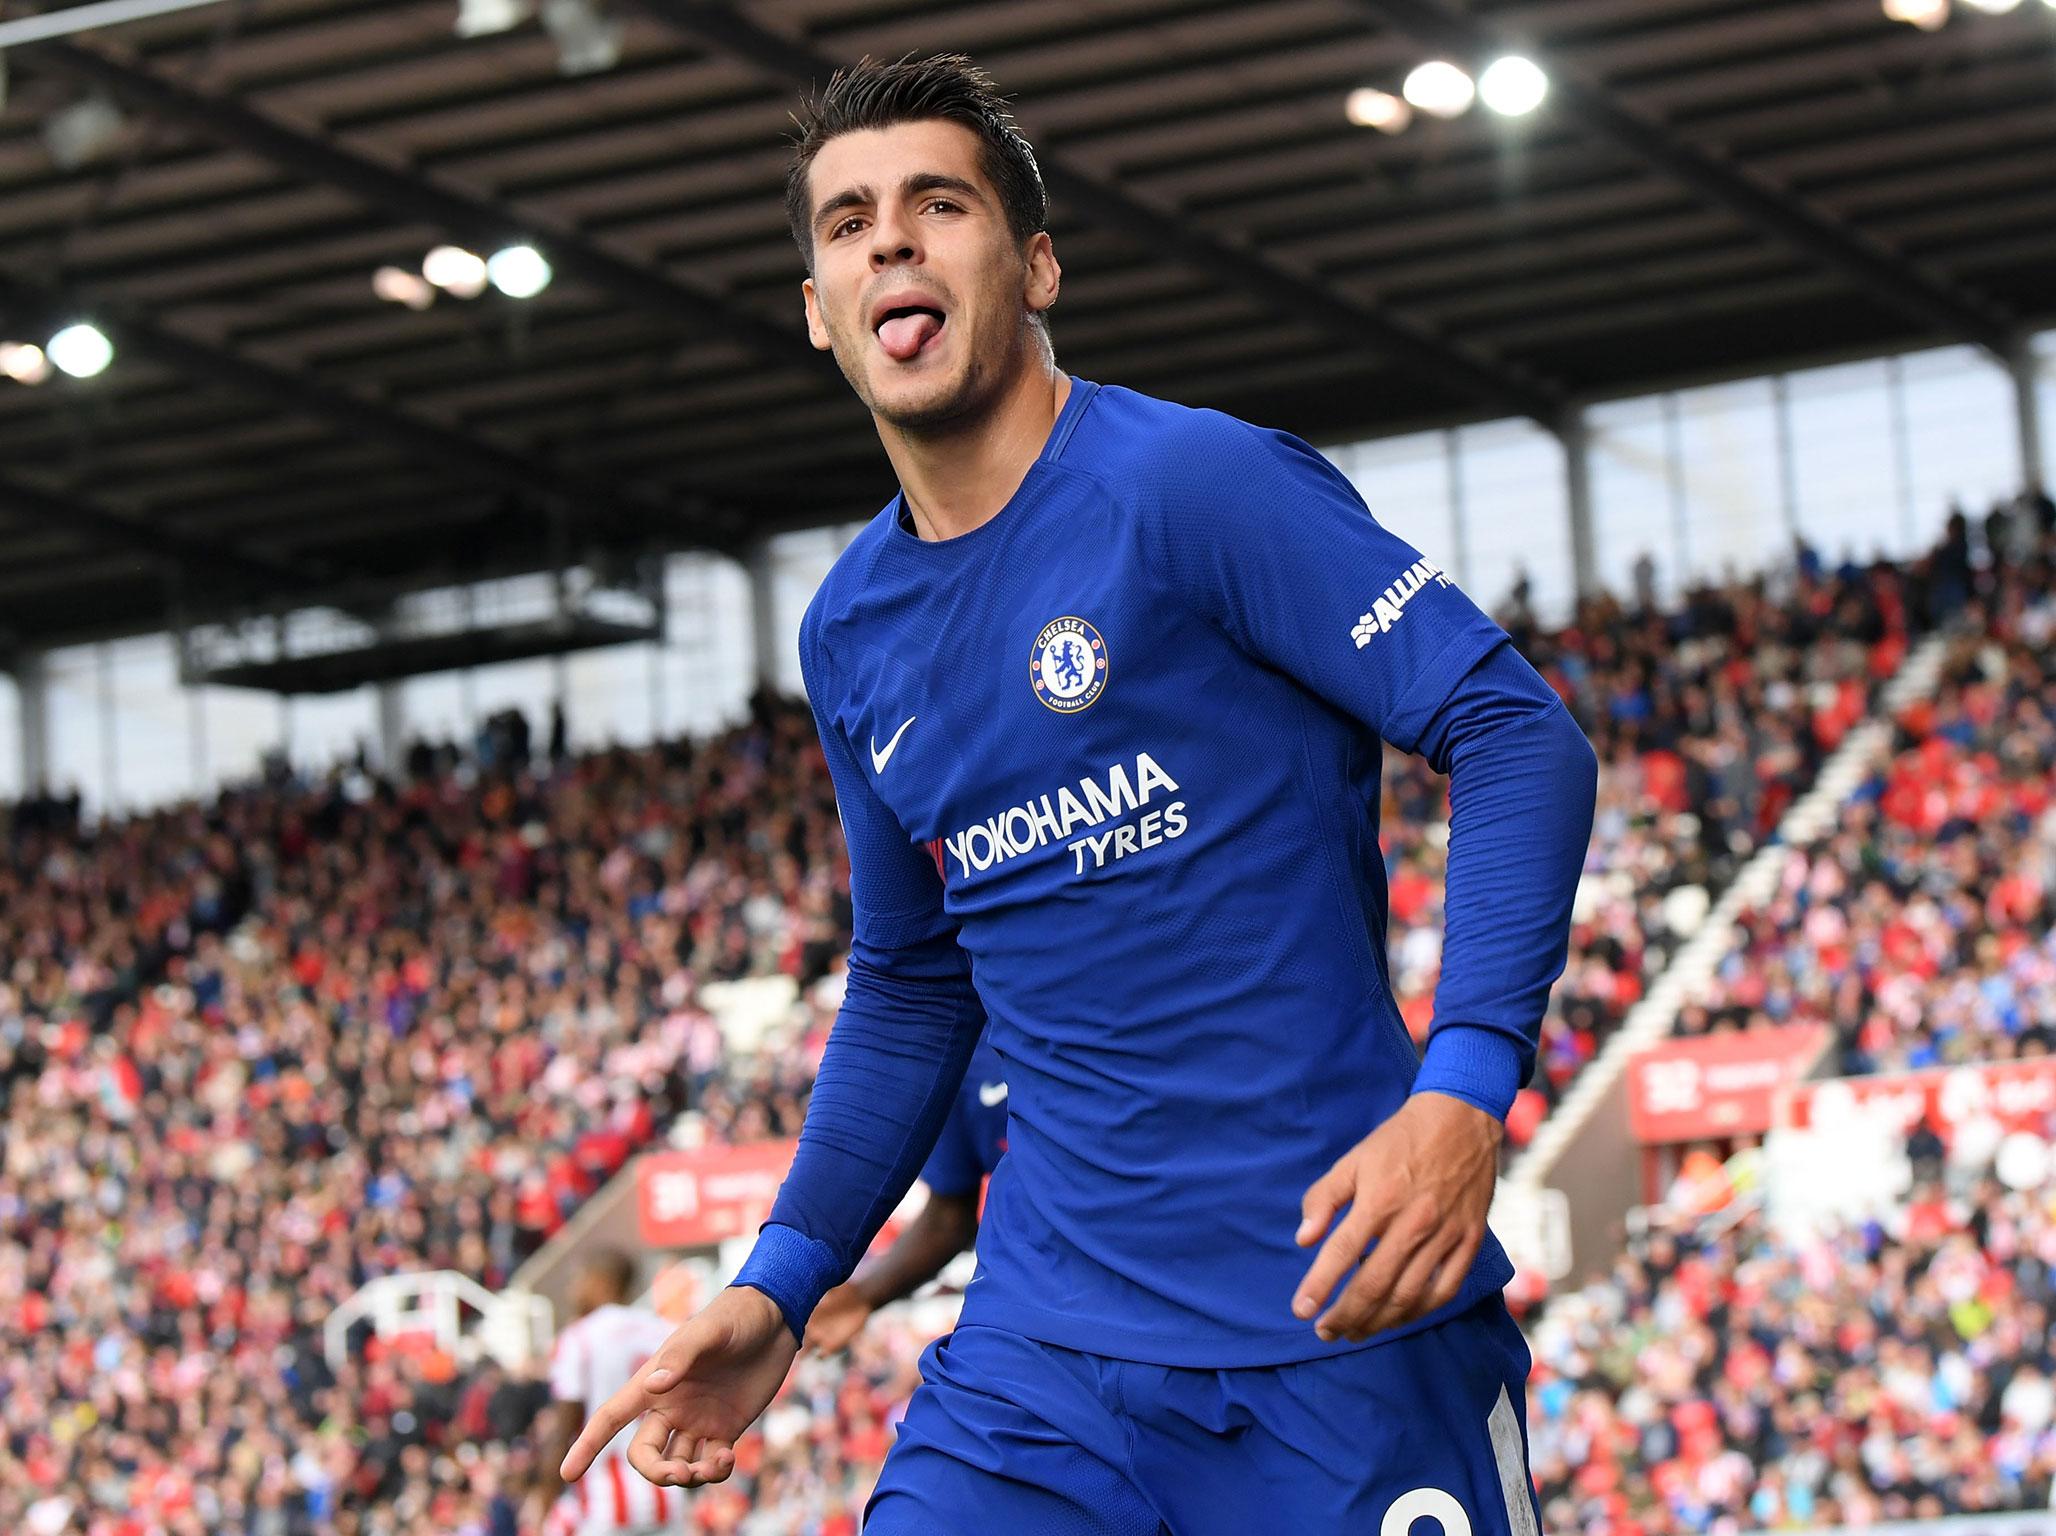 Alvaro Morata helped himself to a hat-trick with the champions far too good for Stoke